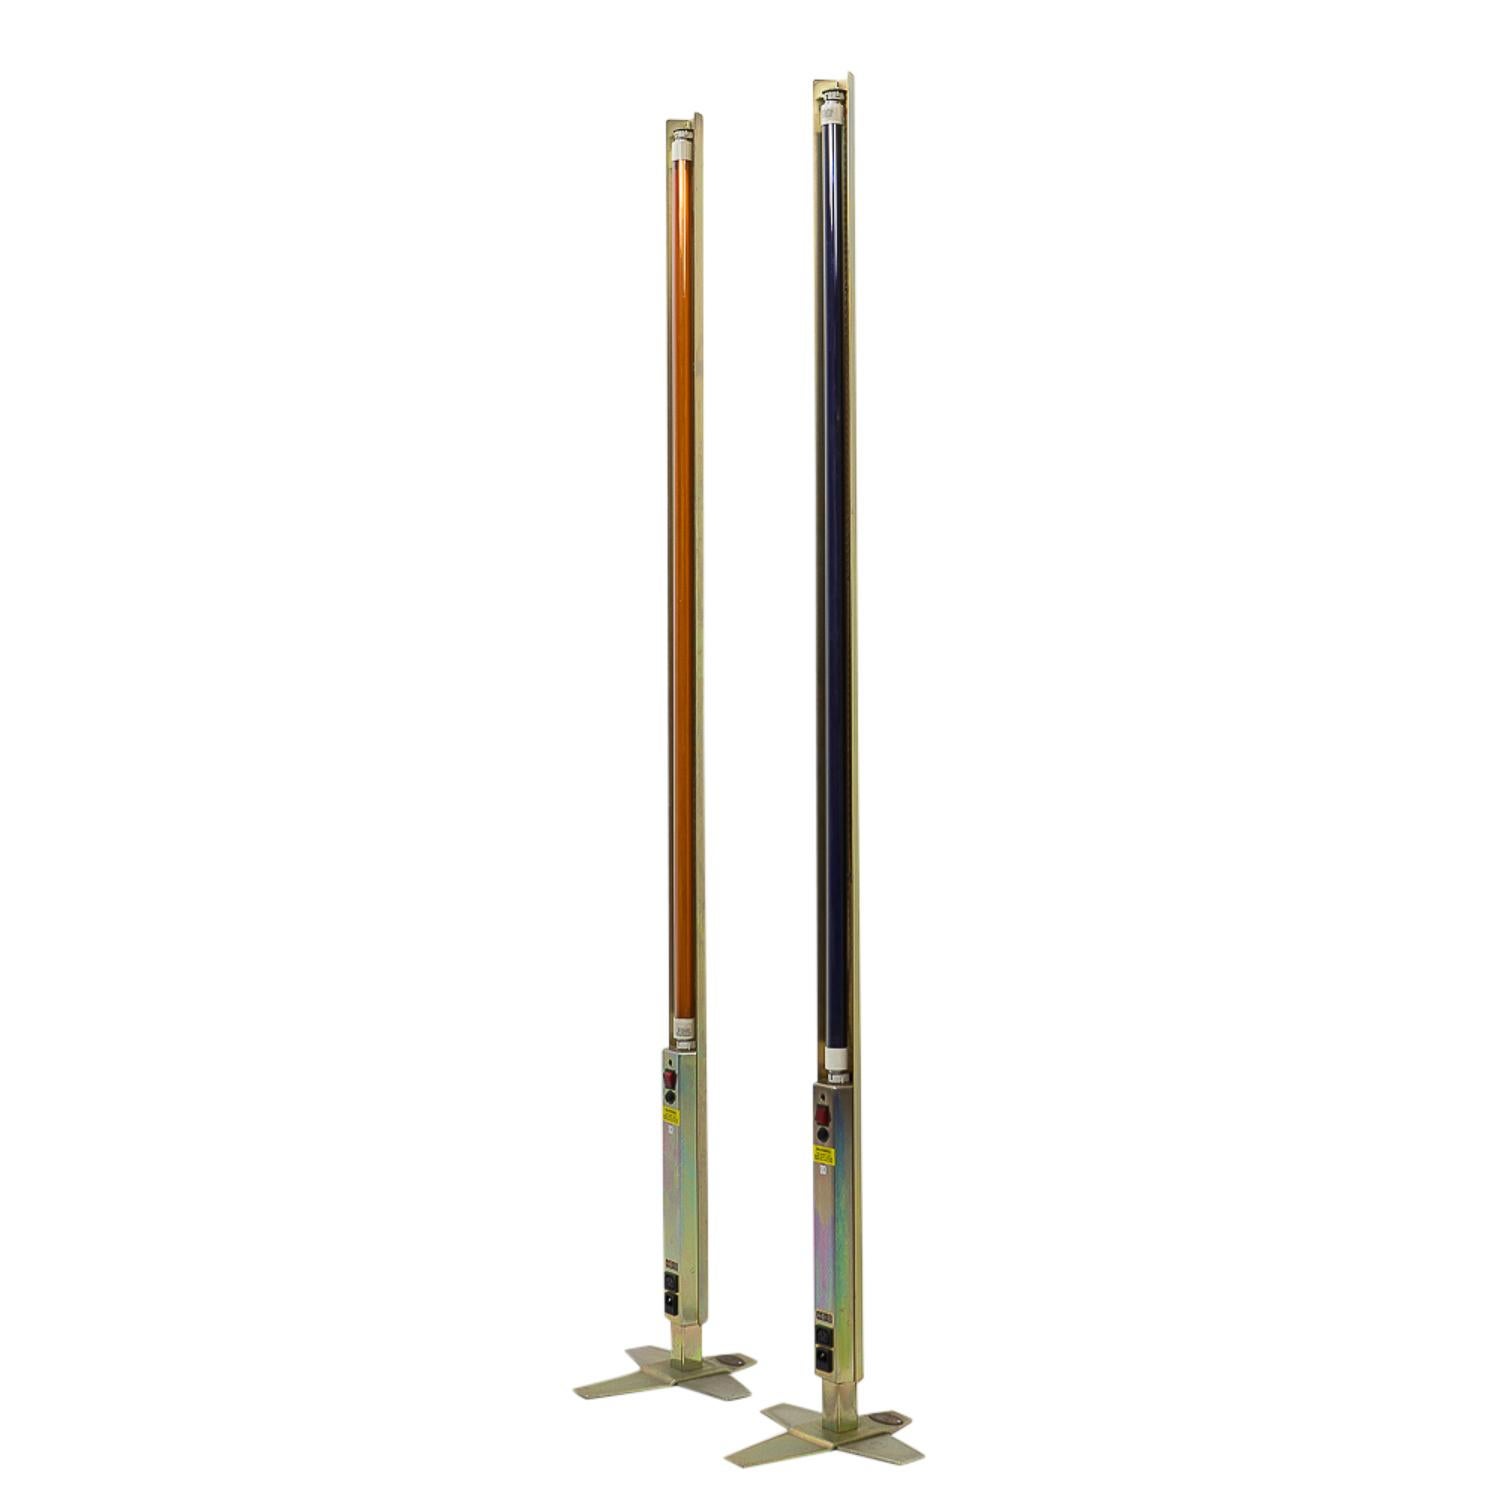 Set of two Aura floor lamps by Mark Brazier-Jones, designed during the first half of the 1990s.

Mark Brazier-Jones (UK) is known for his particular surrealistic style often referred to as neo classical or even space-age baroque. According to the